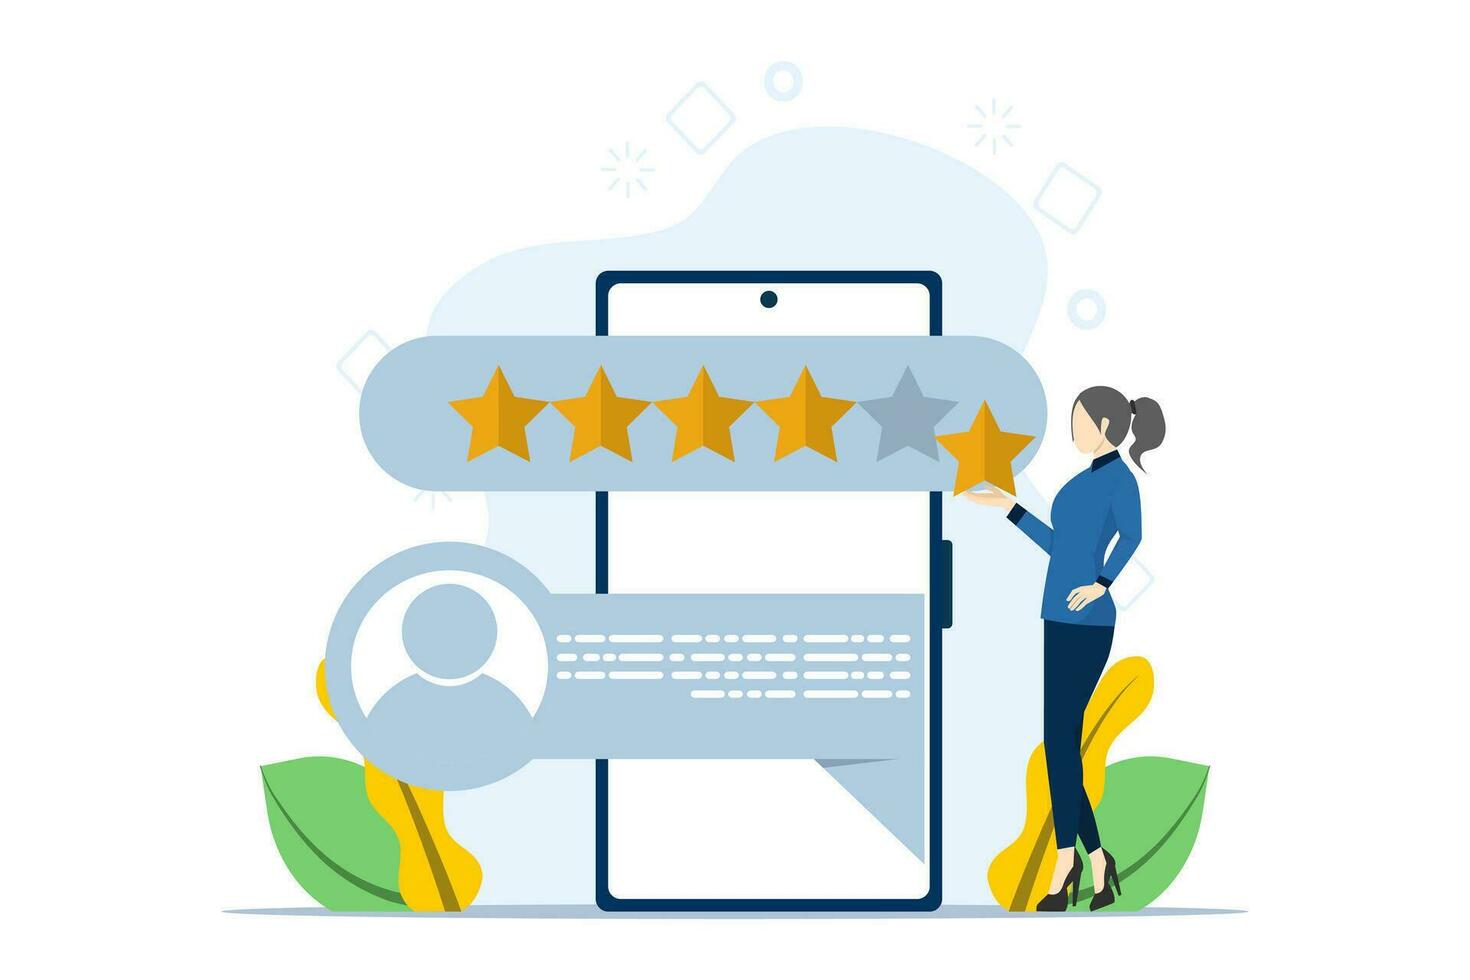 customer review rating and feedback concept. characters provide five-star feedback and voice satisfaction ratings on the smartphone app. Flat vector illustration isolated on white background.